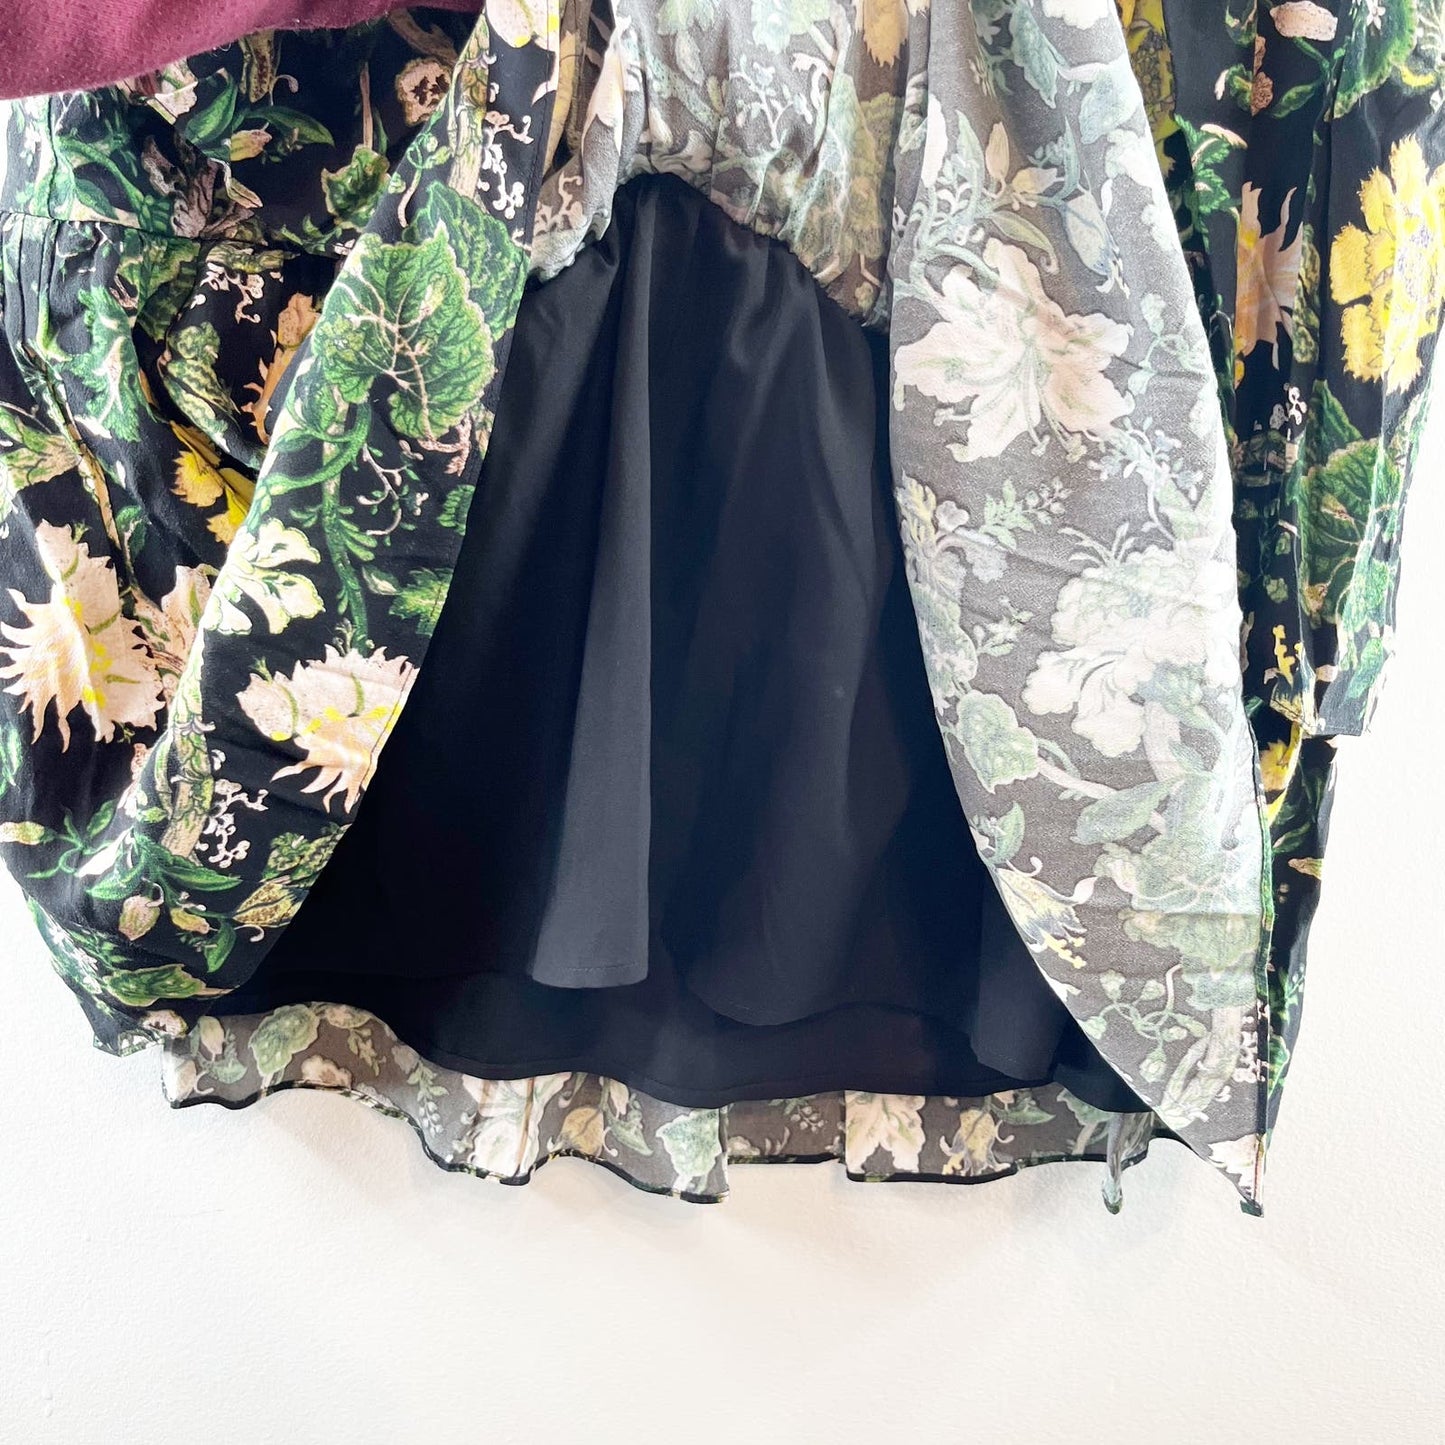 Club Monaco Floral Tiered Lined Midi Skirt Black Yellow Green 6